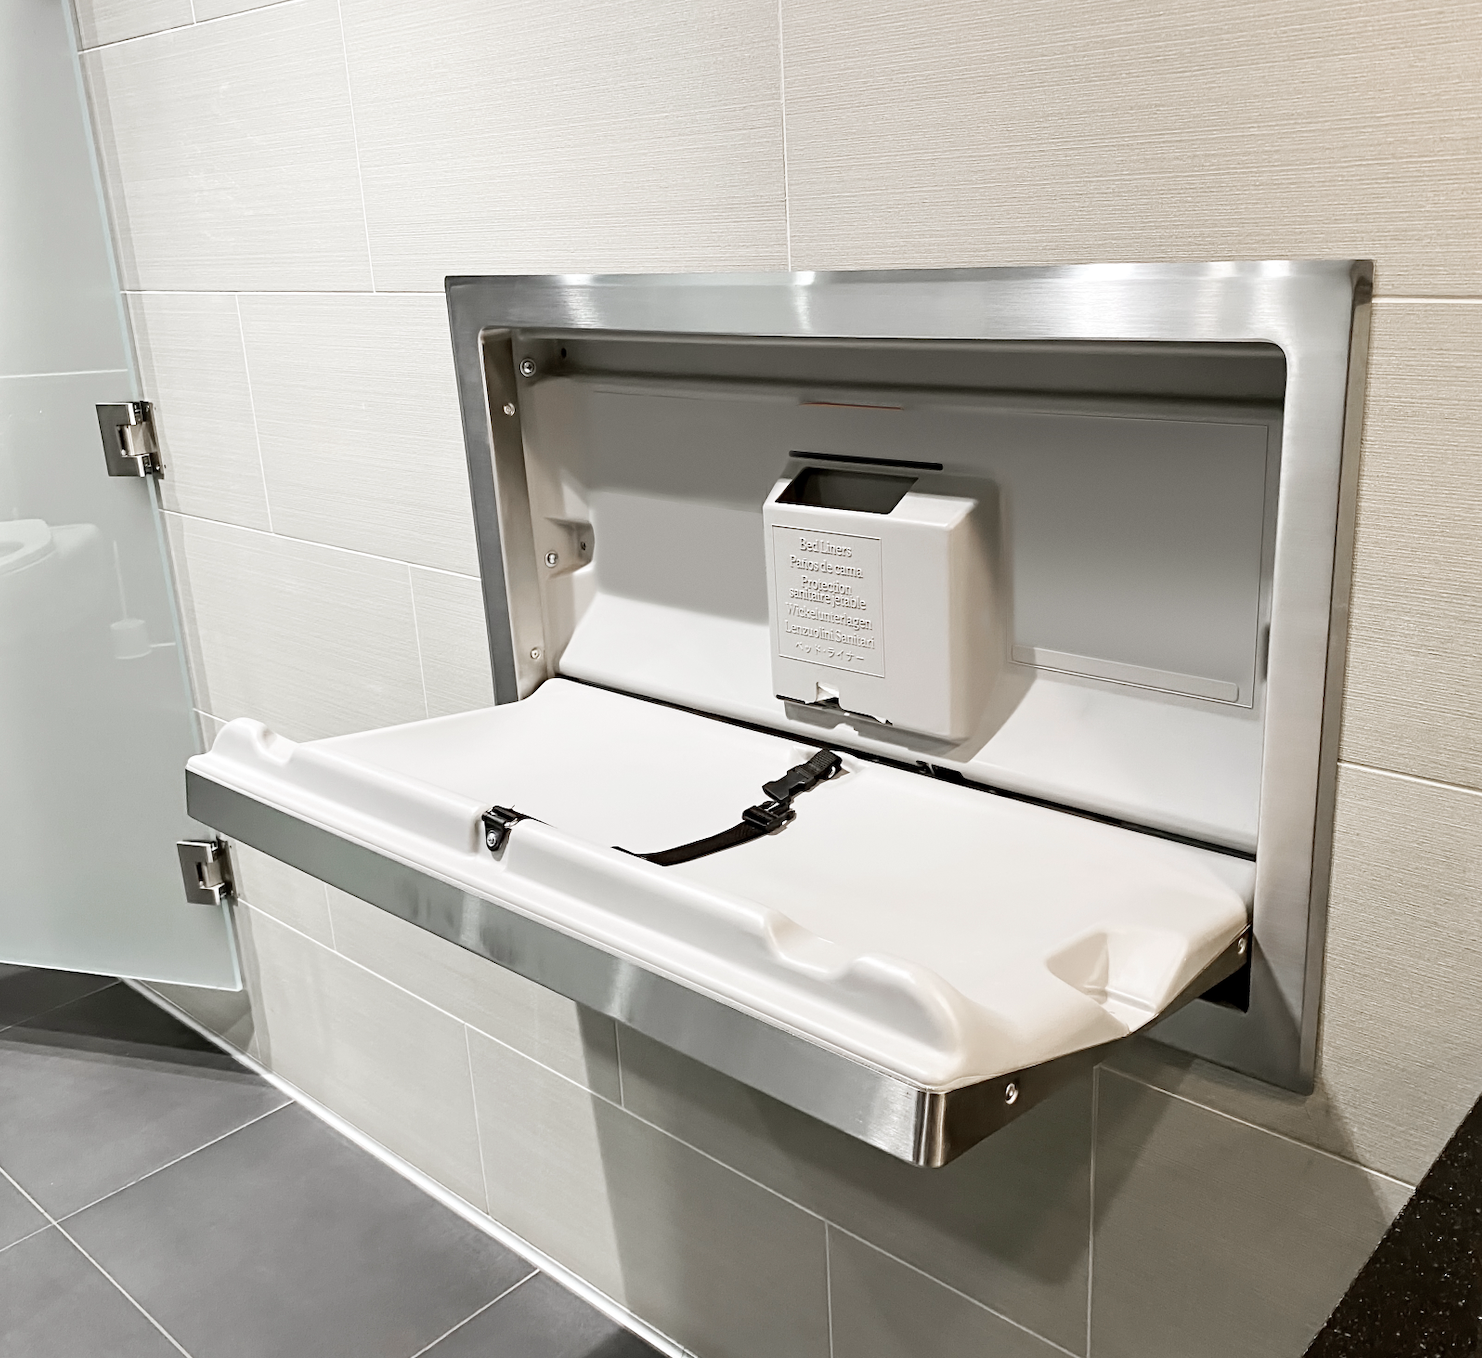 Wall-mounted baby changing station open in a public restroom